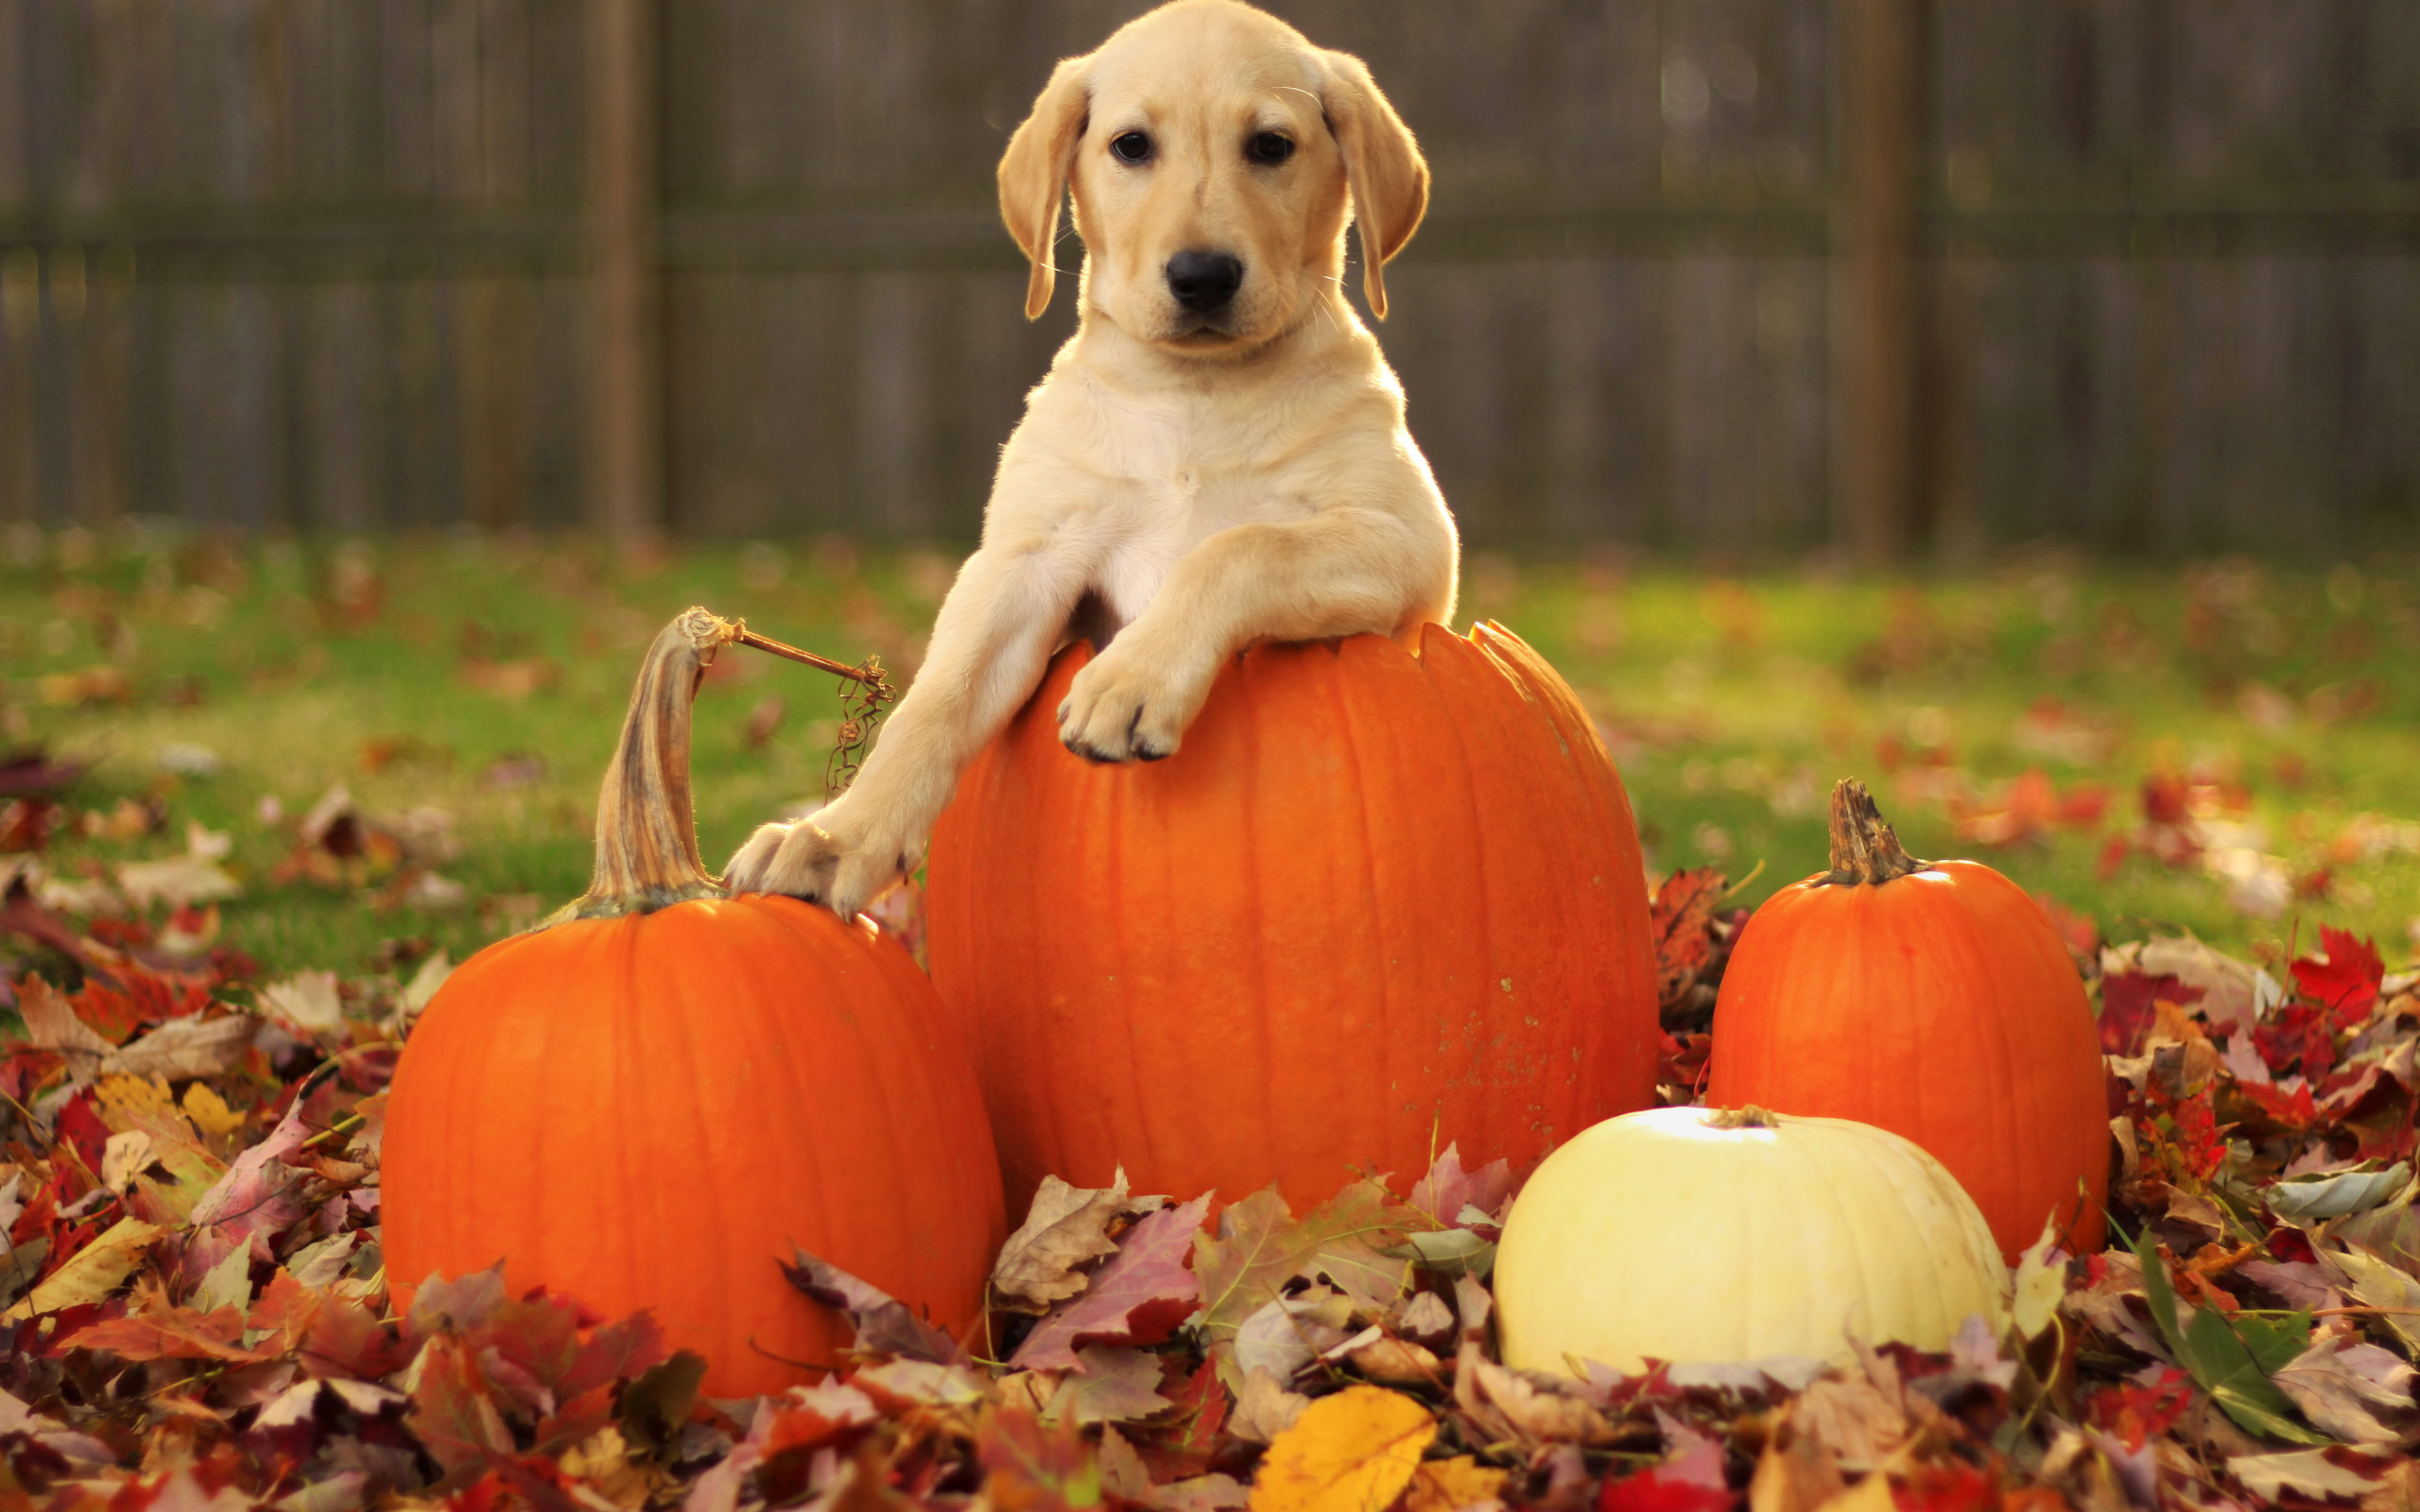 Autumn Free Wallpaper – A pumpkin and a..dog is a great wallpaper for